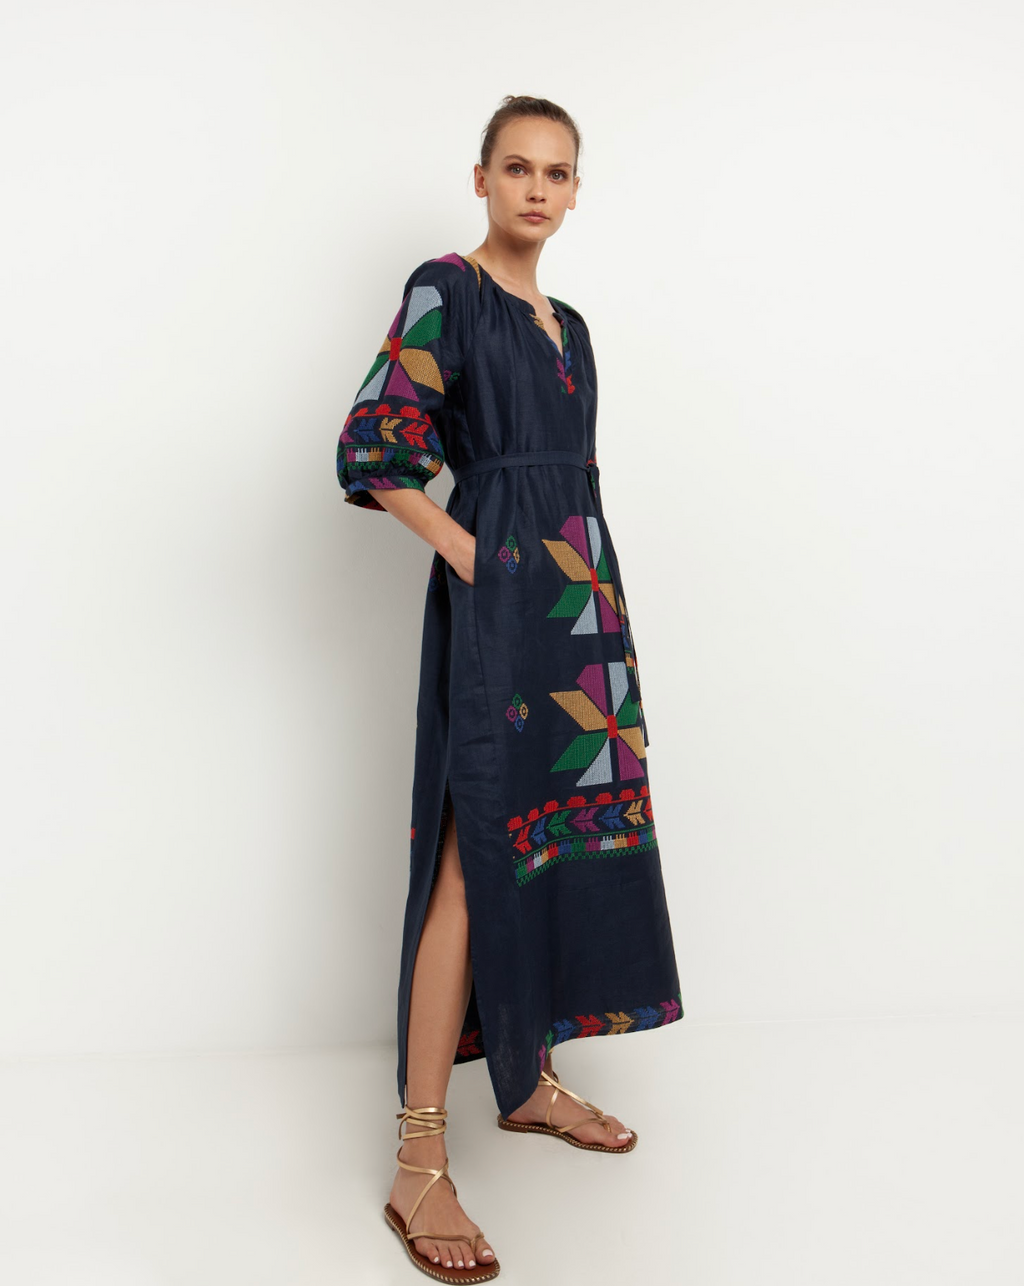 Aeolis Belted Midi Dress with Color Block in Navy Blue/Multi